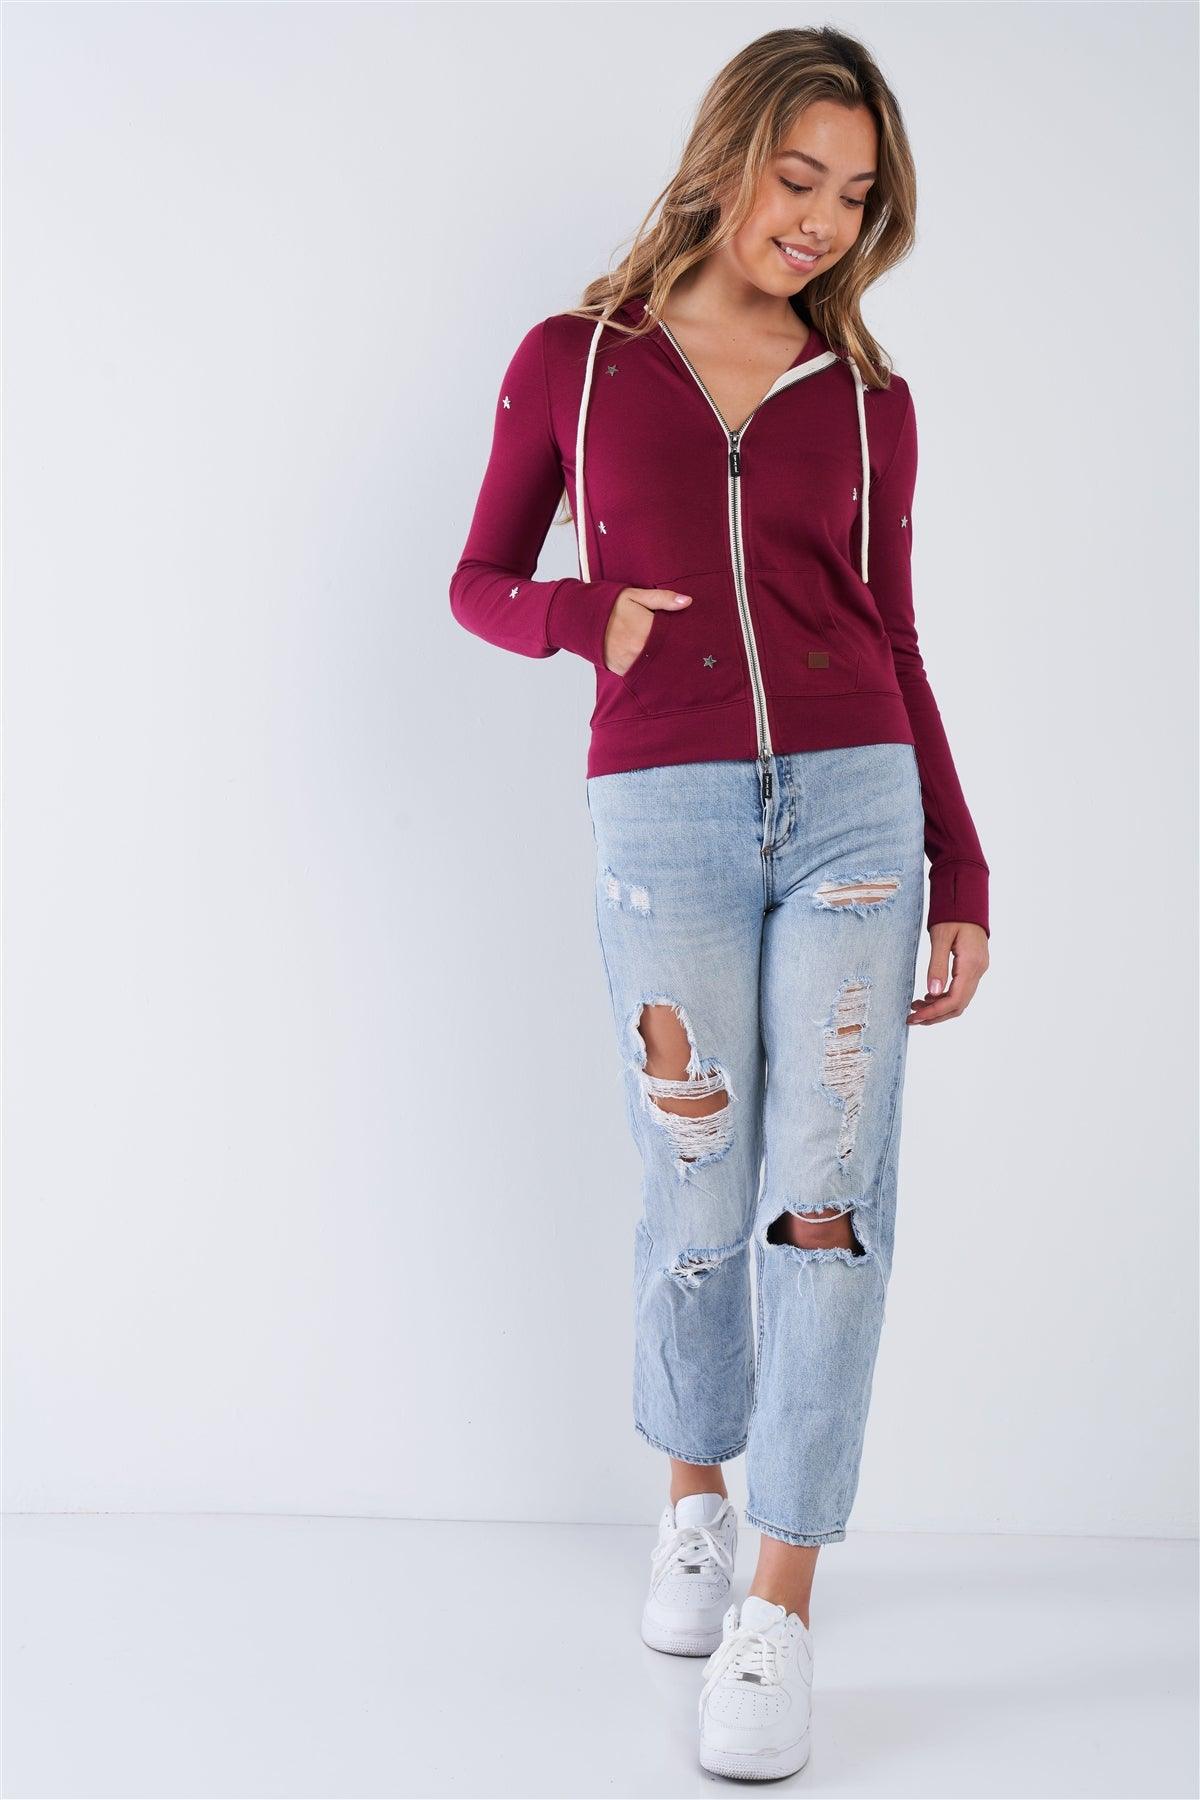 Plum Long Sleeve "Be The Light" Graphic Star Studded Comfy Zip Up Hoodie